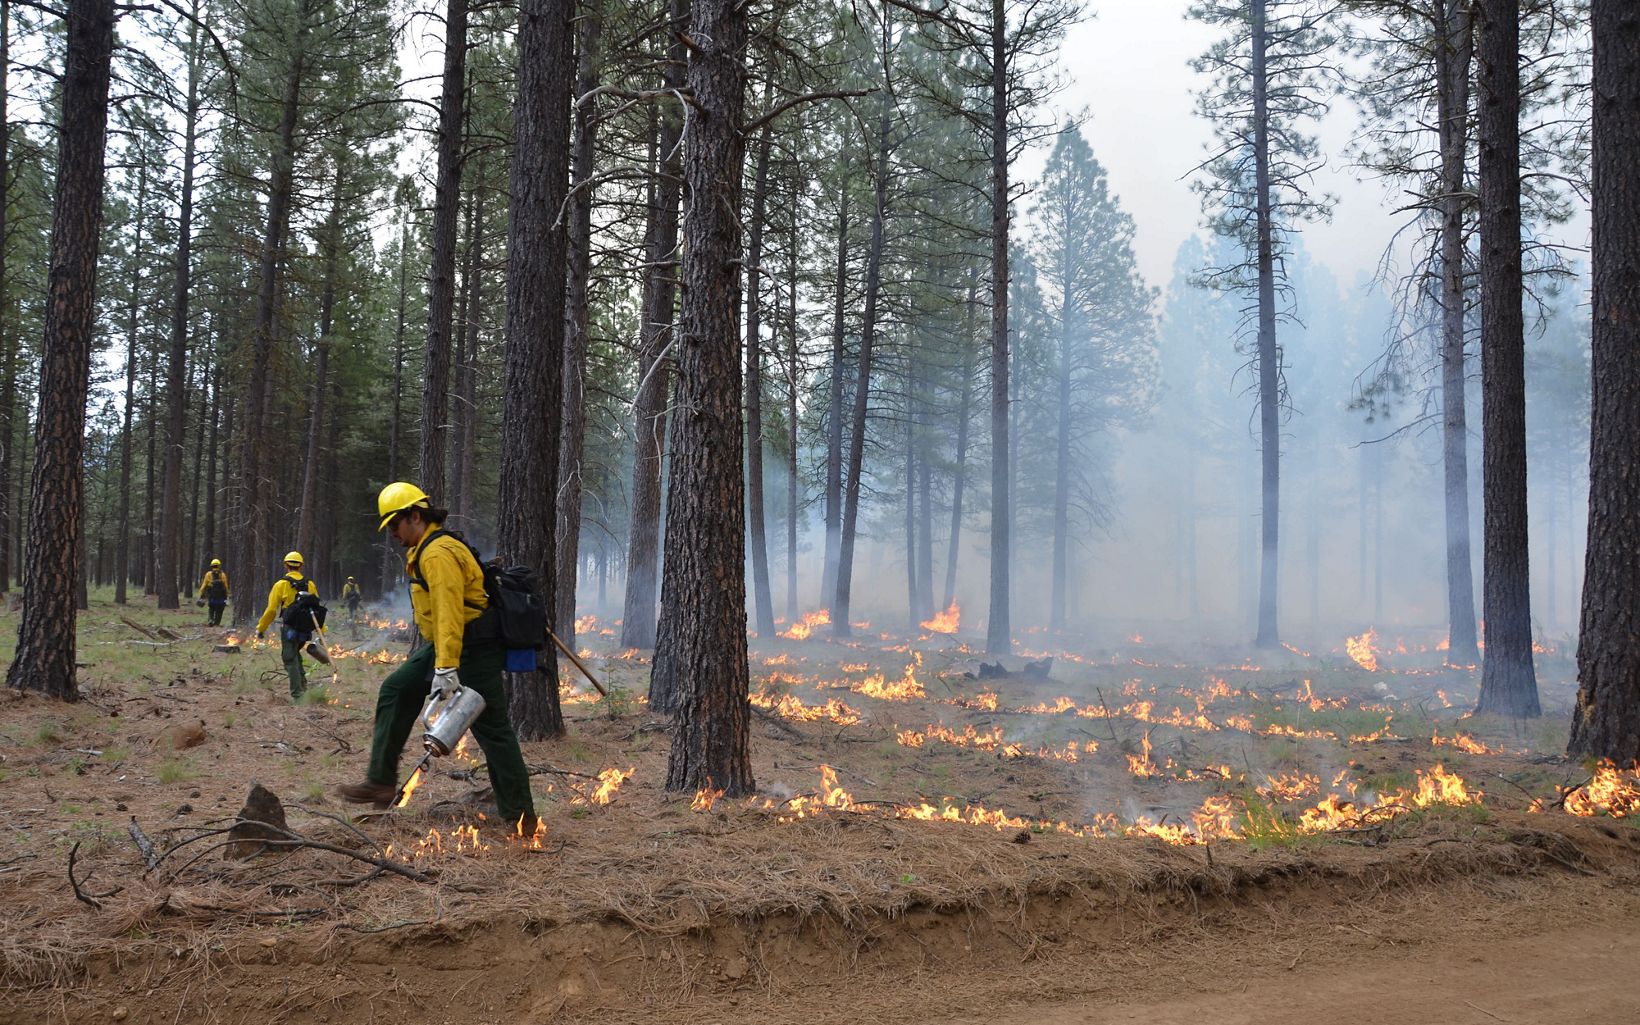 Firefighters use drip torches to set lines of prescribed fire along the ground cover of a forest in Oregon.